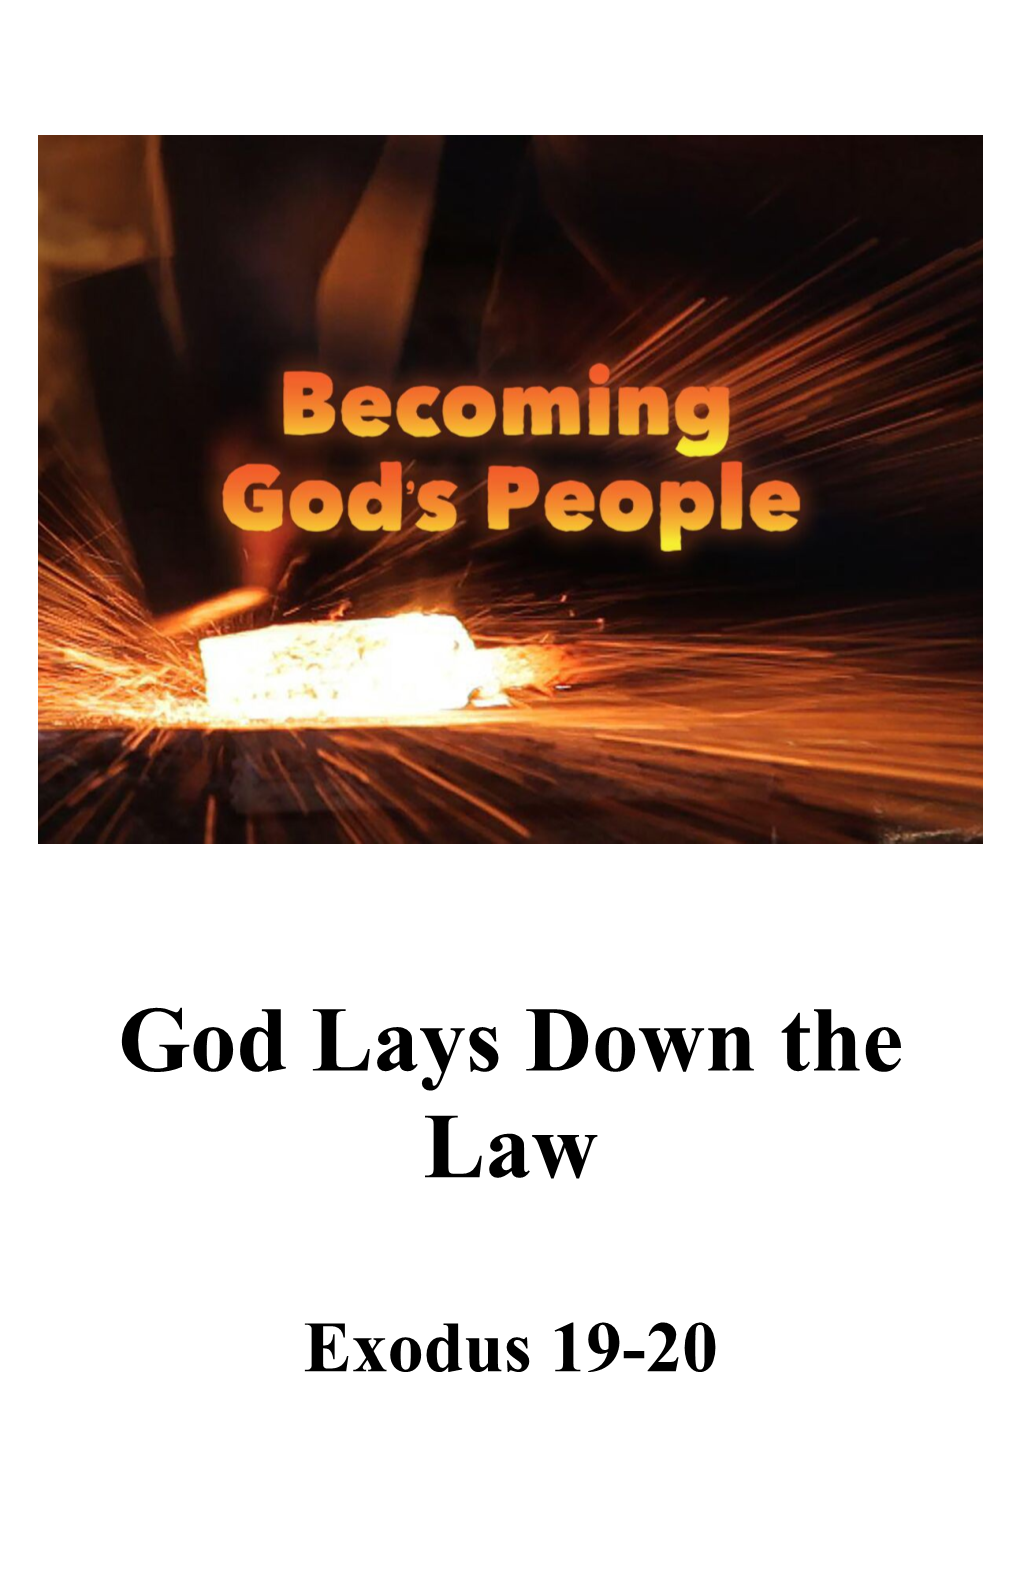 God Lays Down the Law